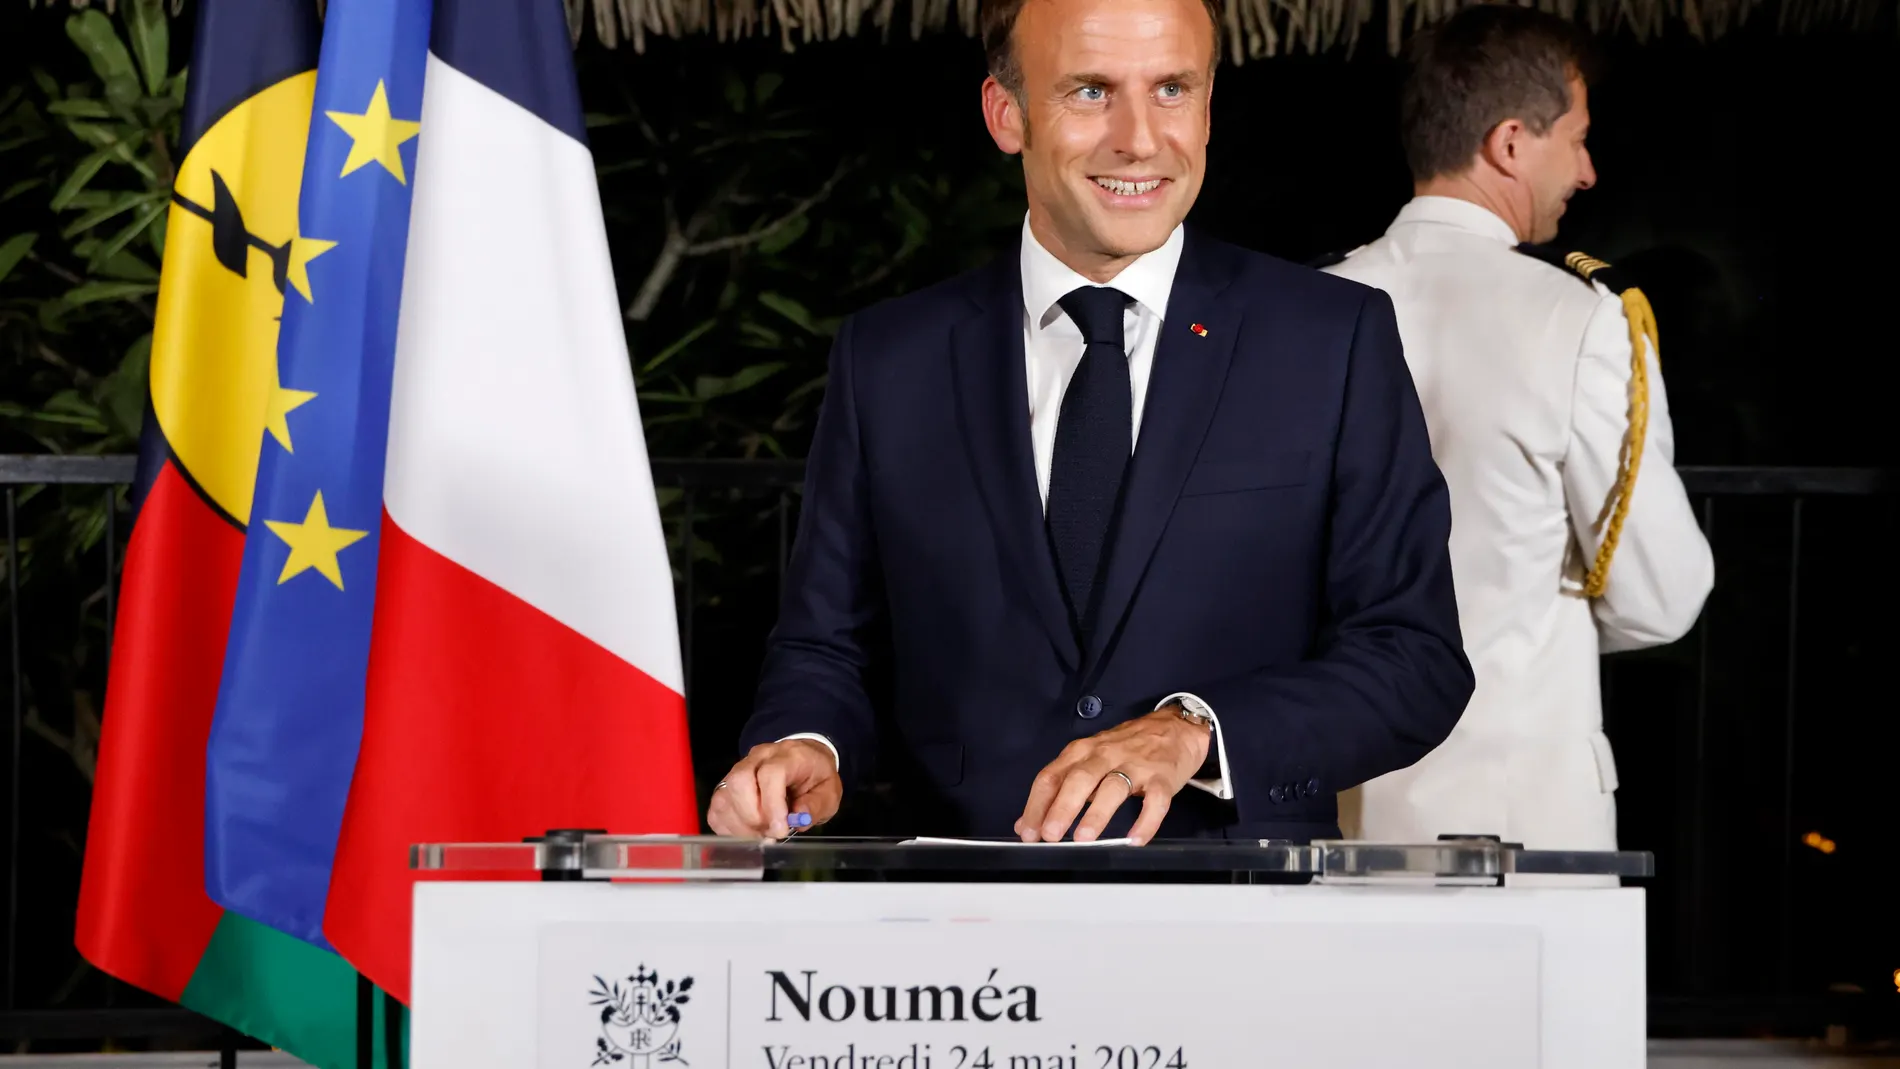 Noumea (New Caledonia), 22/05/2024.- France's President Emmanuel Macron delivers a speech at New Caledonia's High Commissioner residency in Noumea, France's Pacific territory of New Caledonia, 23 May 2024. Macron flew to France's Pacific territory of New Caledonia aiming to defuse a crisis after nine days of riots that have killed six people and injured hundreds. (Disturbios, Francia, Nueva Caledonia) EFE/EPA/LUDOVIC MARIN / POOL MAXPPP OUT 